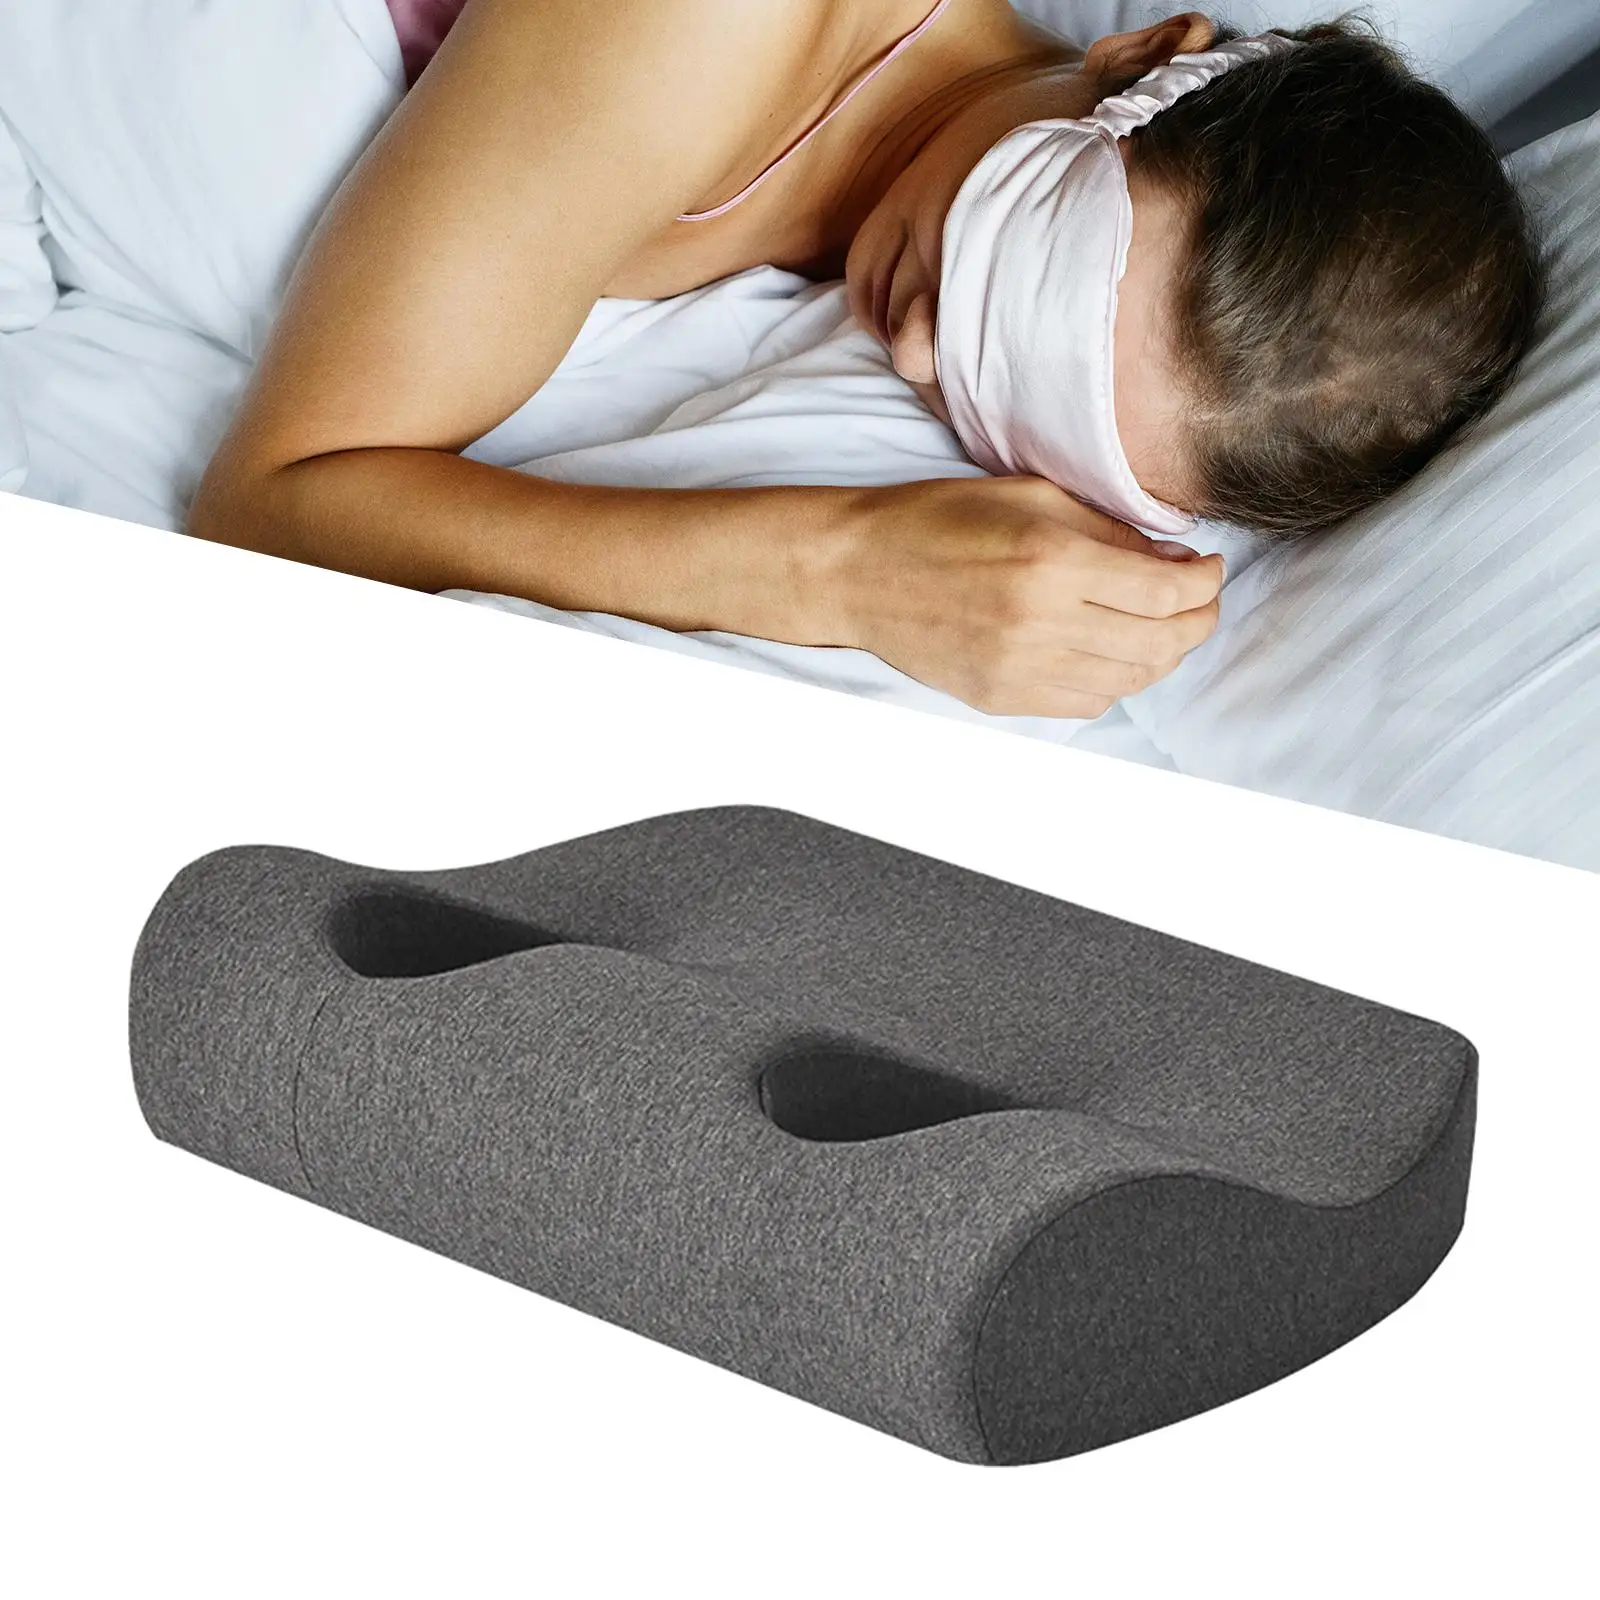 Pillow with Ear Hole for Neck and Shoulder Support Ear Pillows for Stomach Sleeping Earplugs Headphones Side Sleepers Earbuds